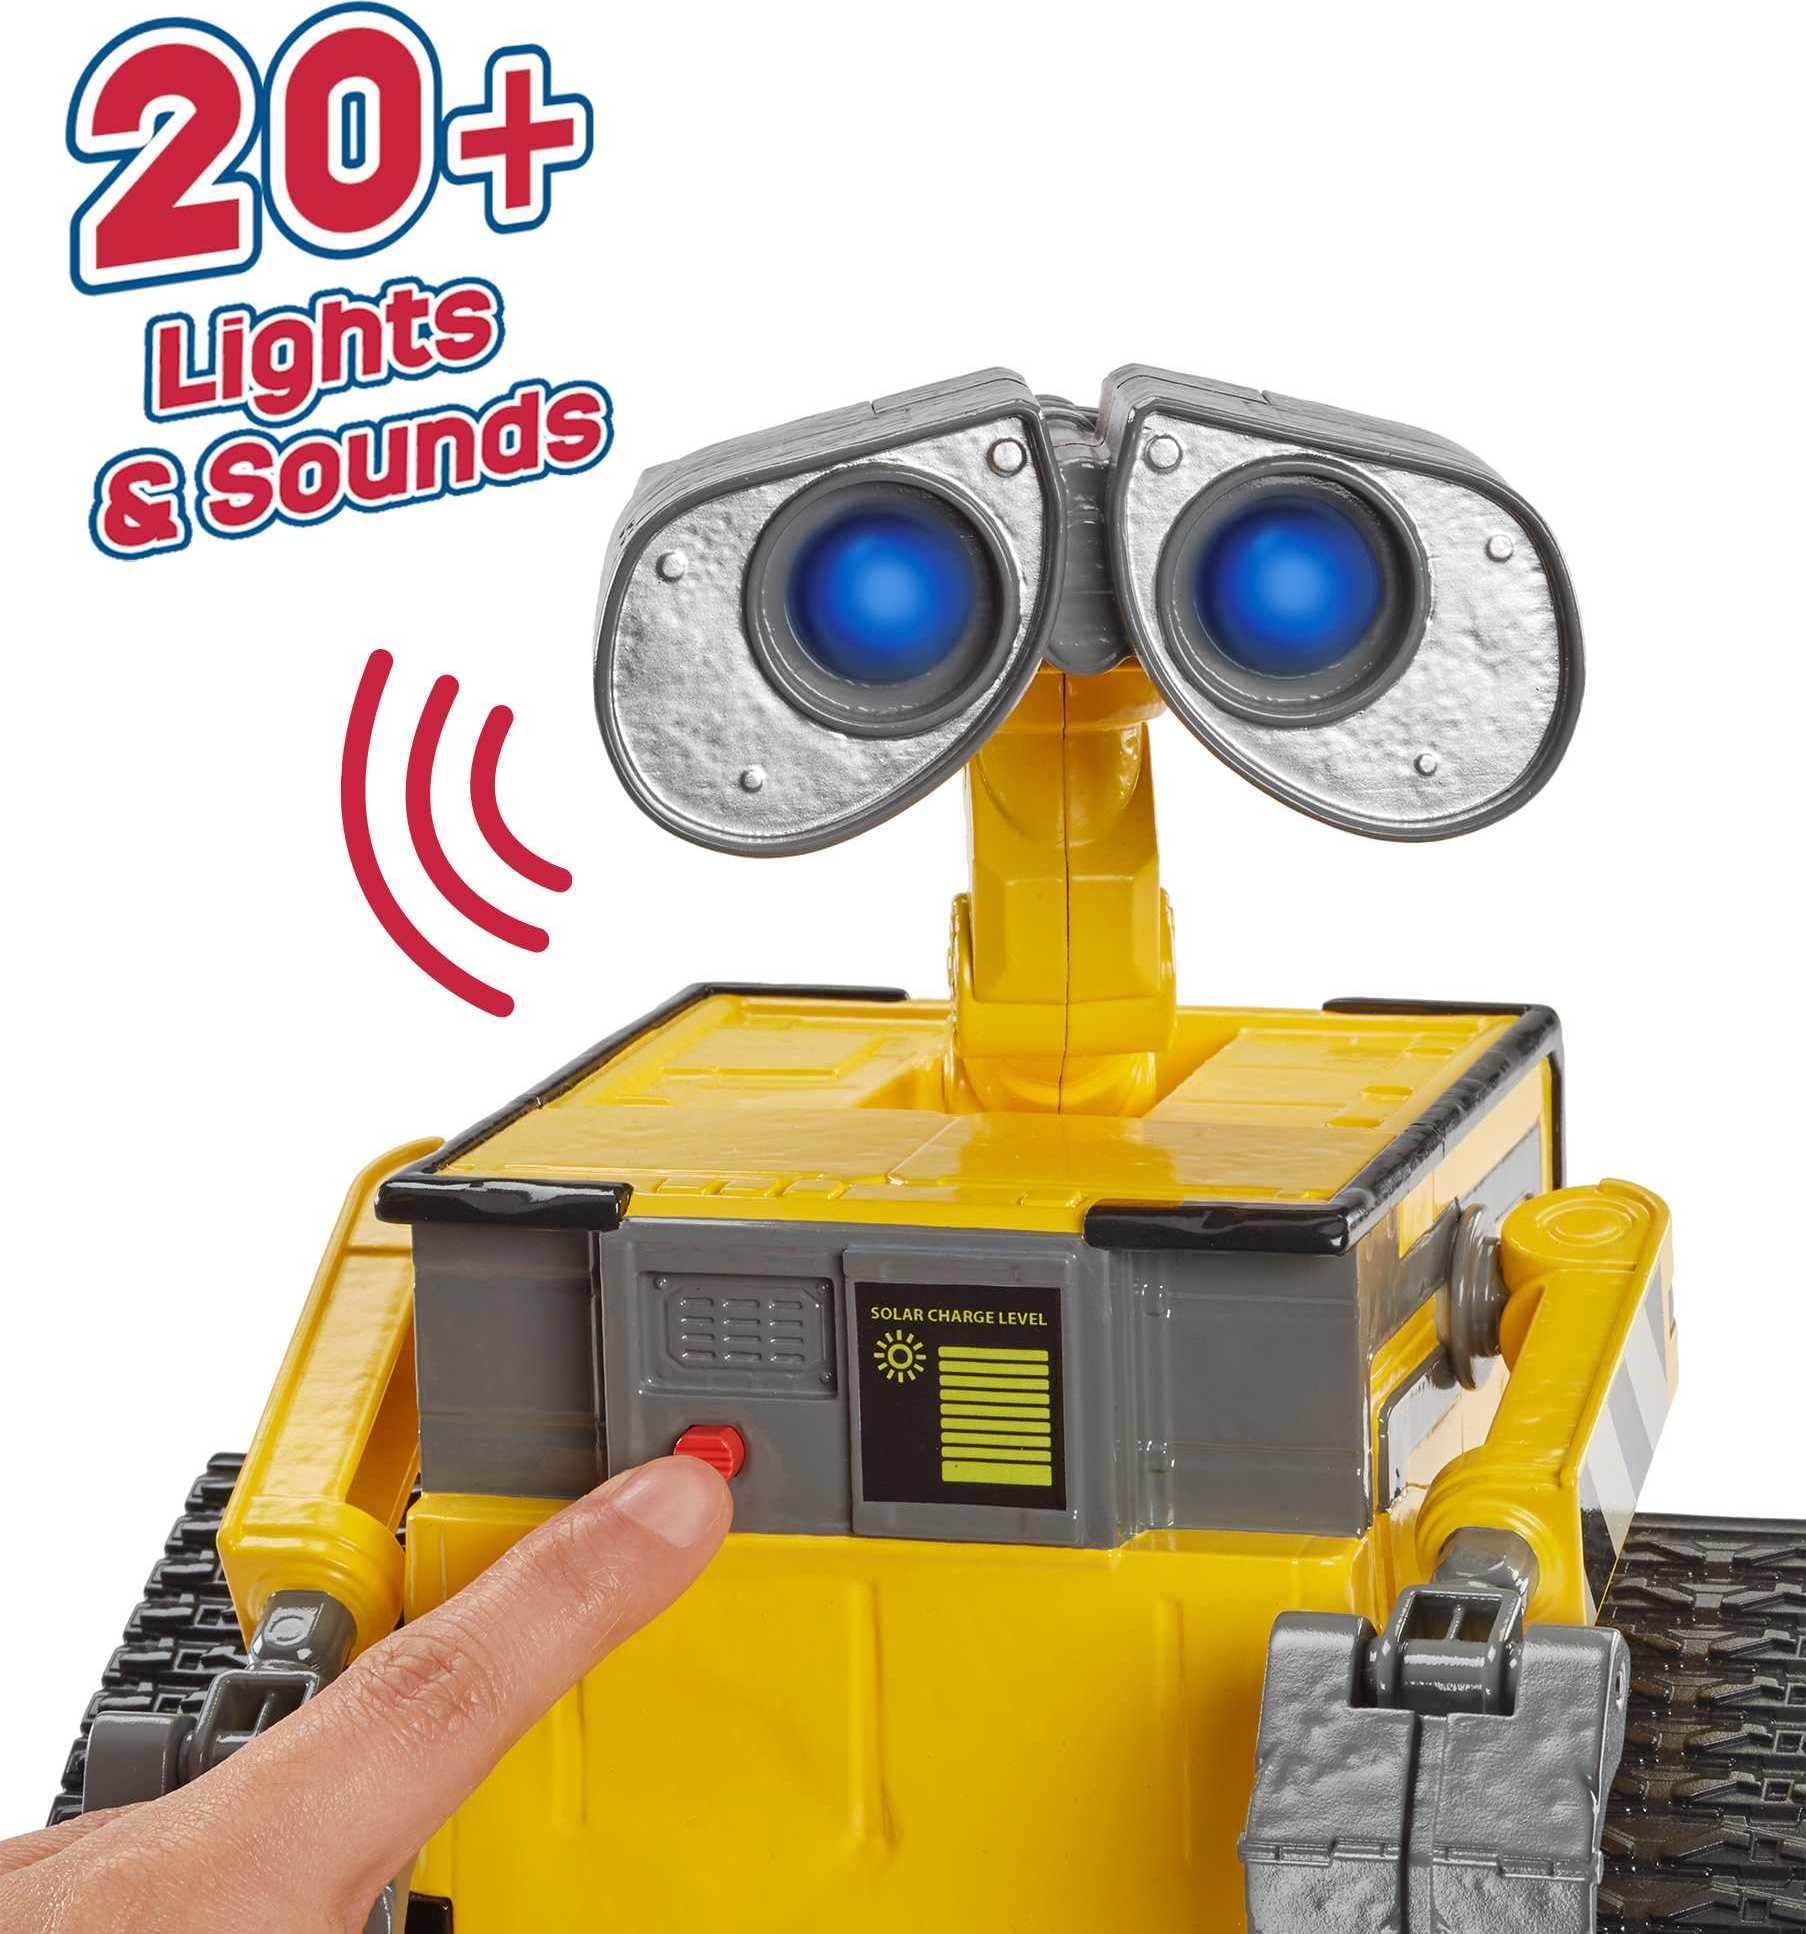 Disney and Pixar WALL-E Robot Toy, Remote Control Hello WALL-E Robot Figure, Gifts for Kids (Amazon Exclusive)